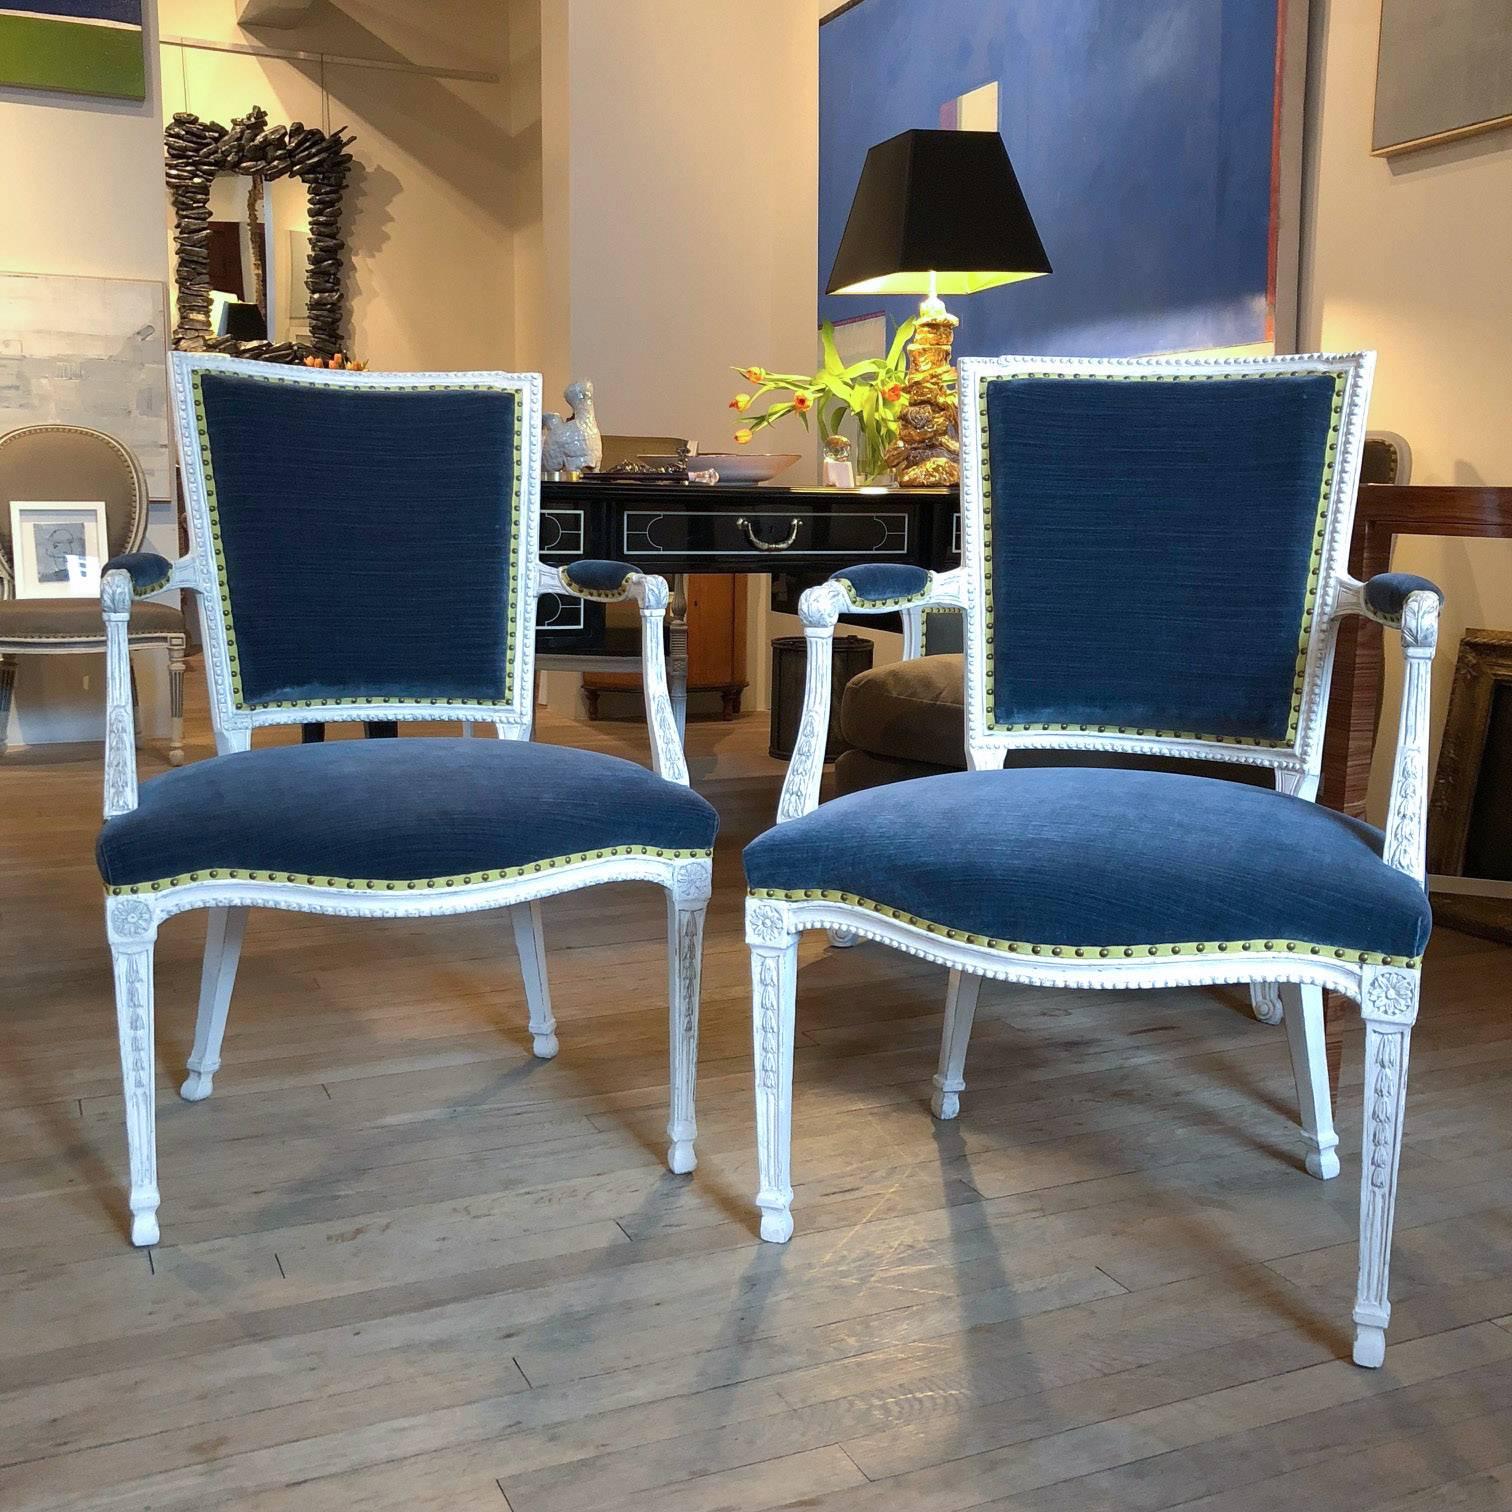 Pair of Adam Gessoed armchairs
English, circa 1790
Now upholstered with blue cotton velvet, grosgrain ribbon and French nailhead.